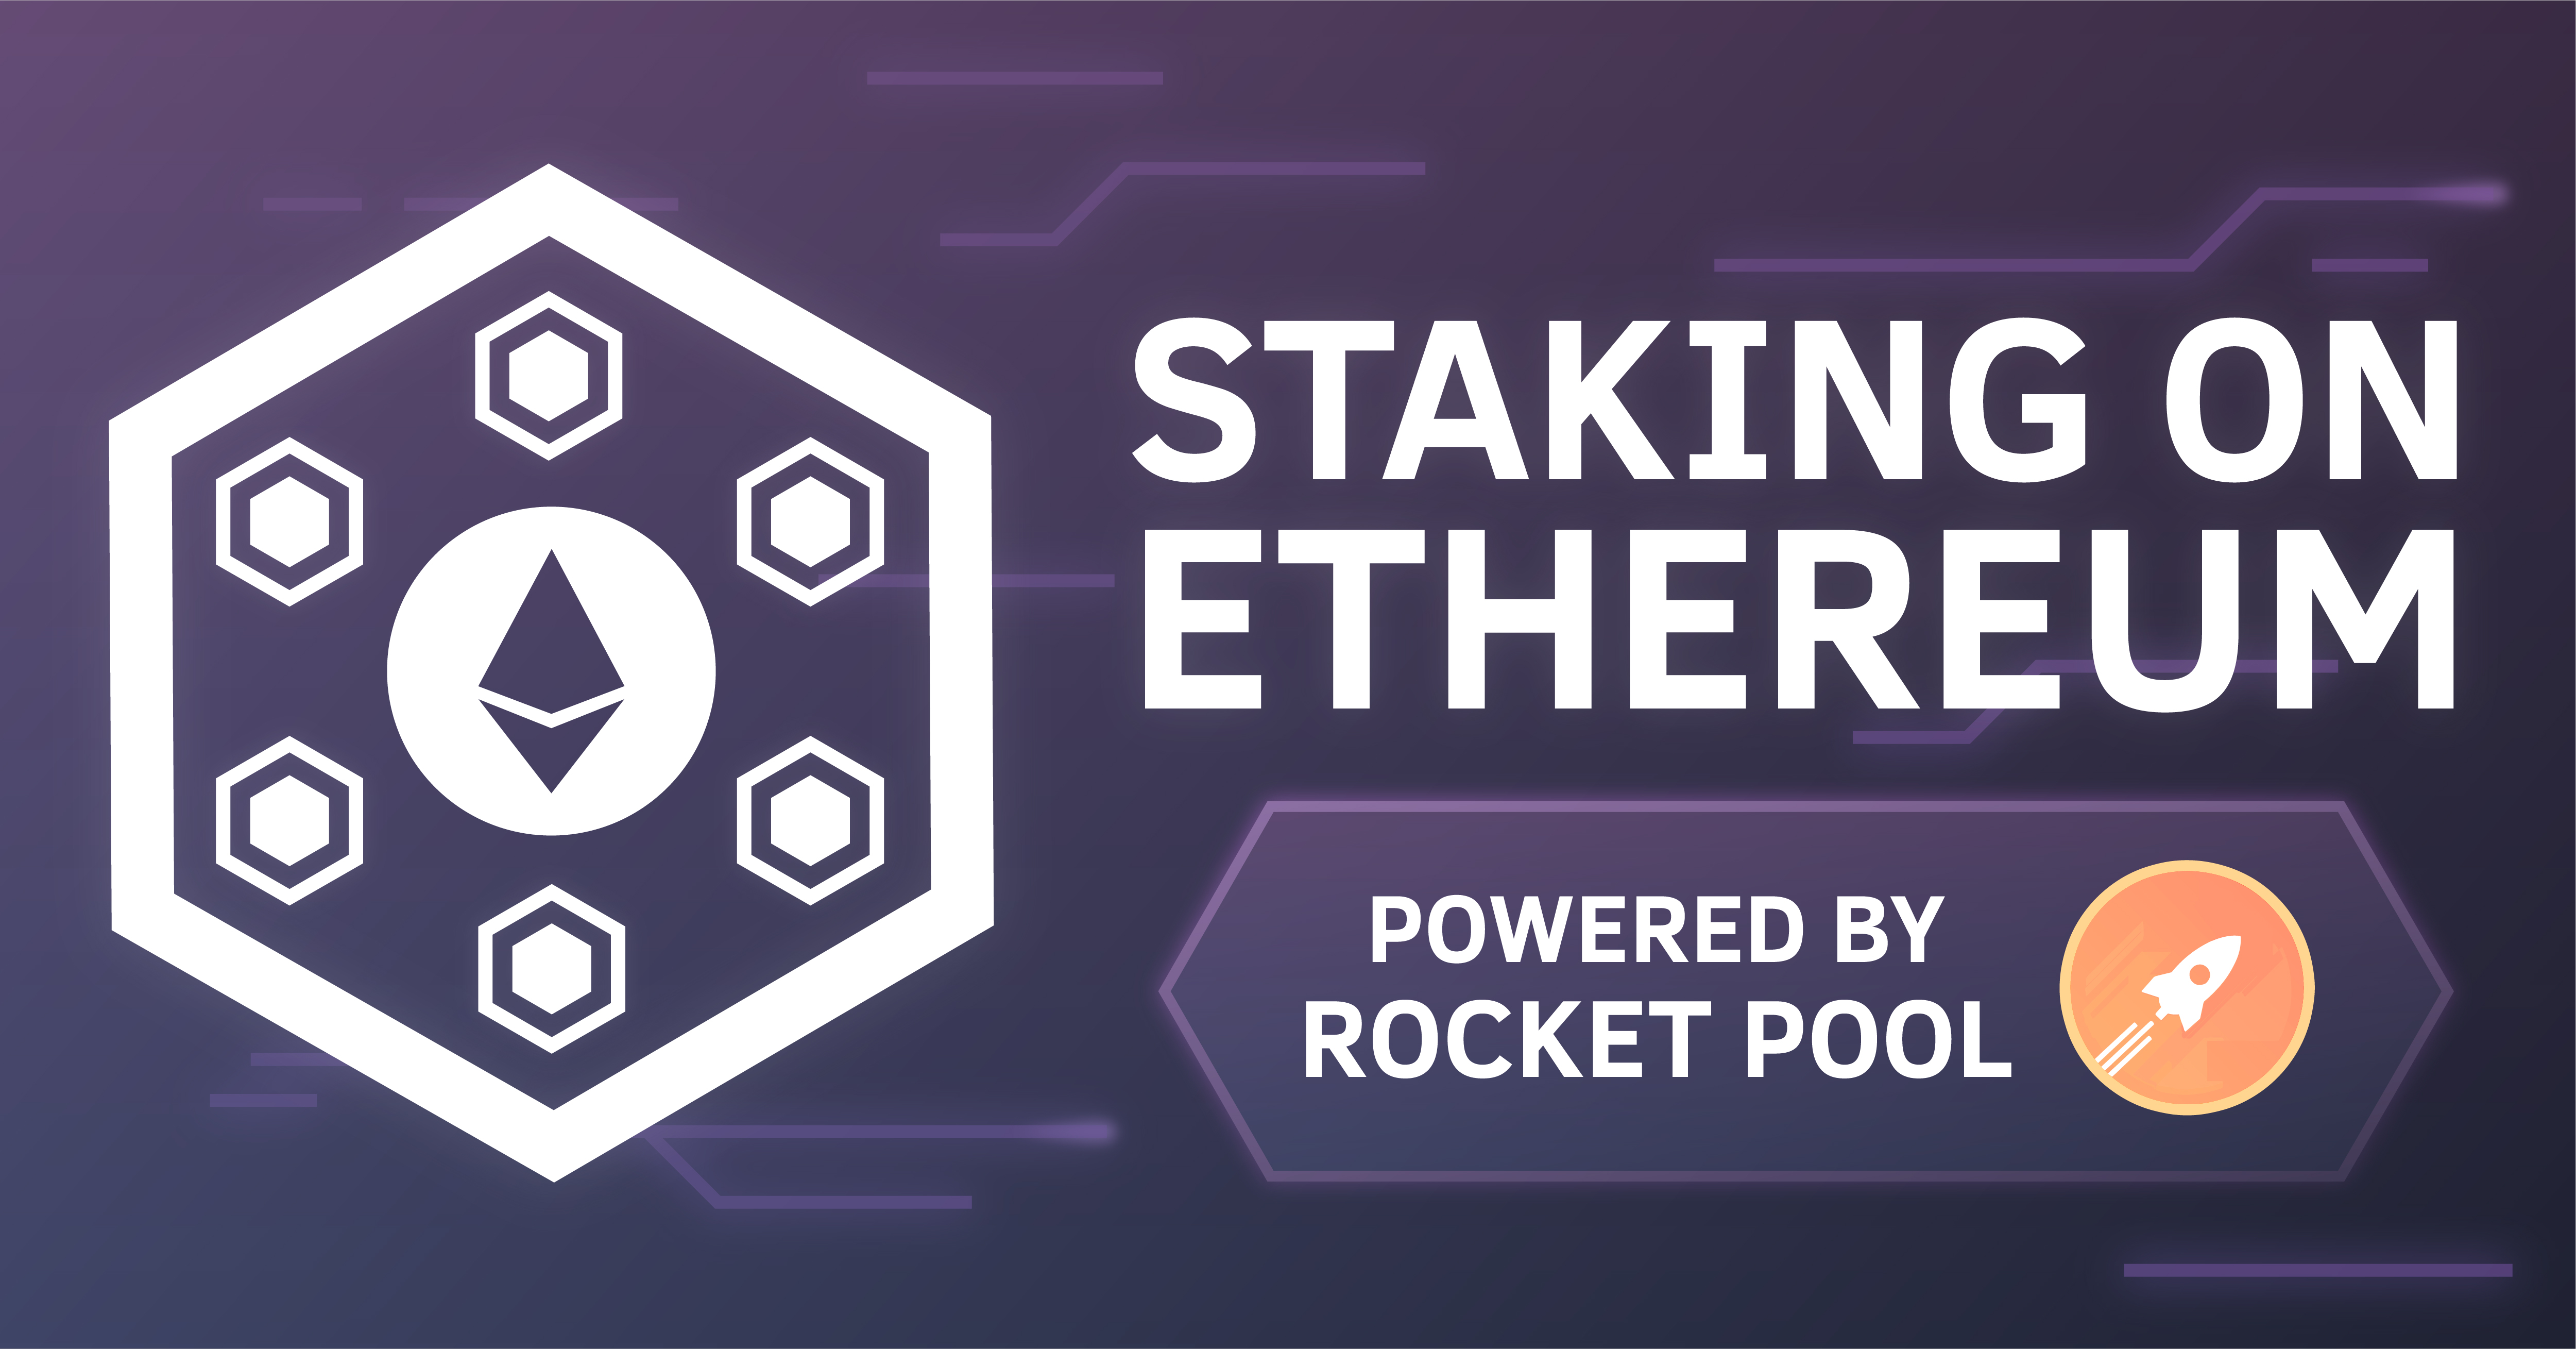 Staking on Ethereum